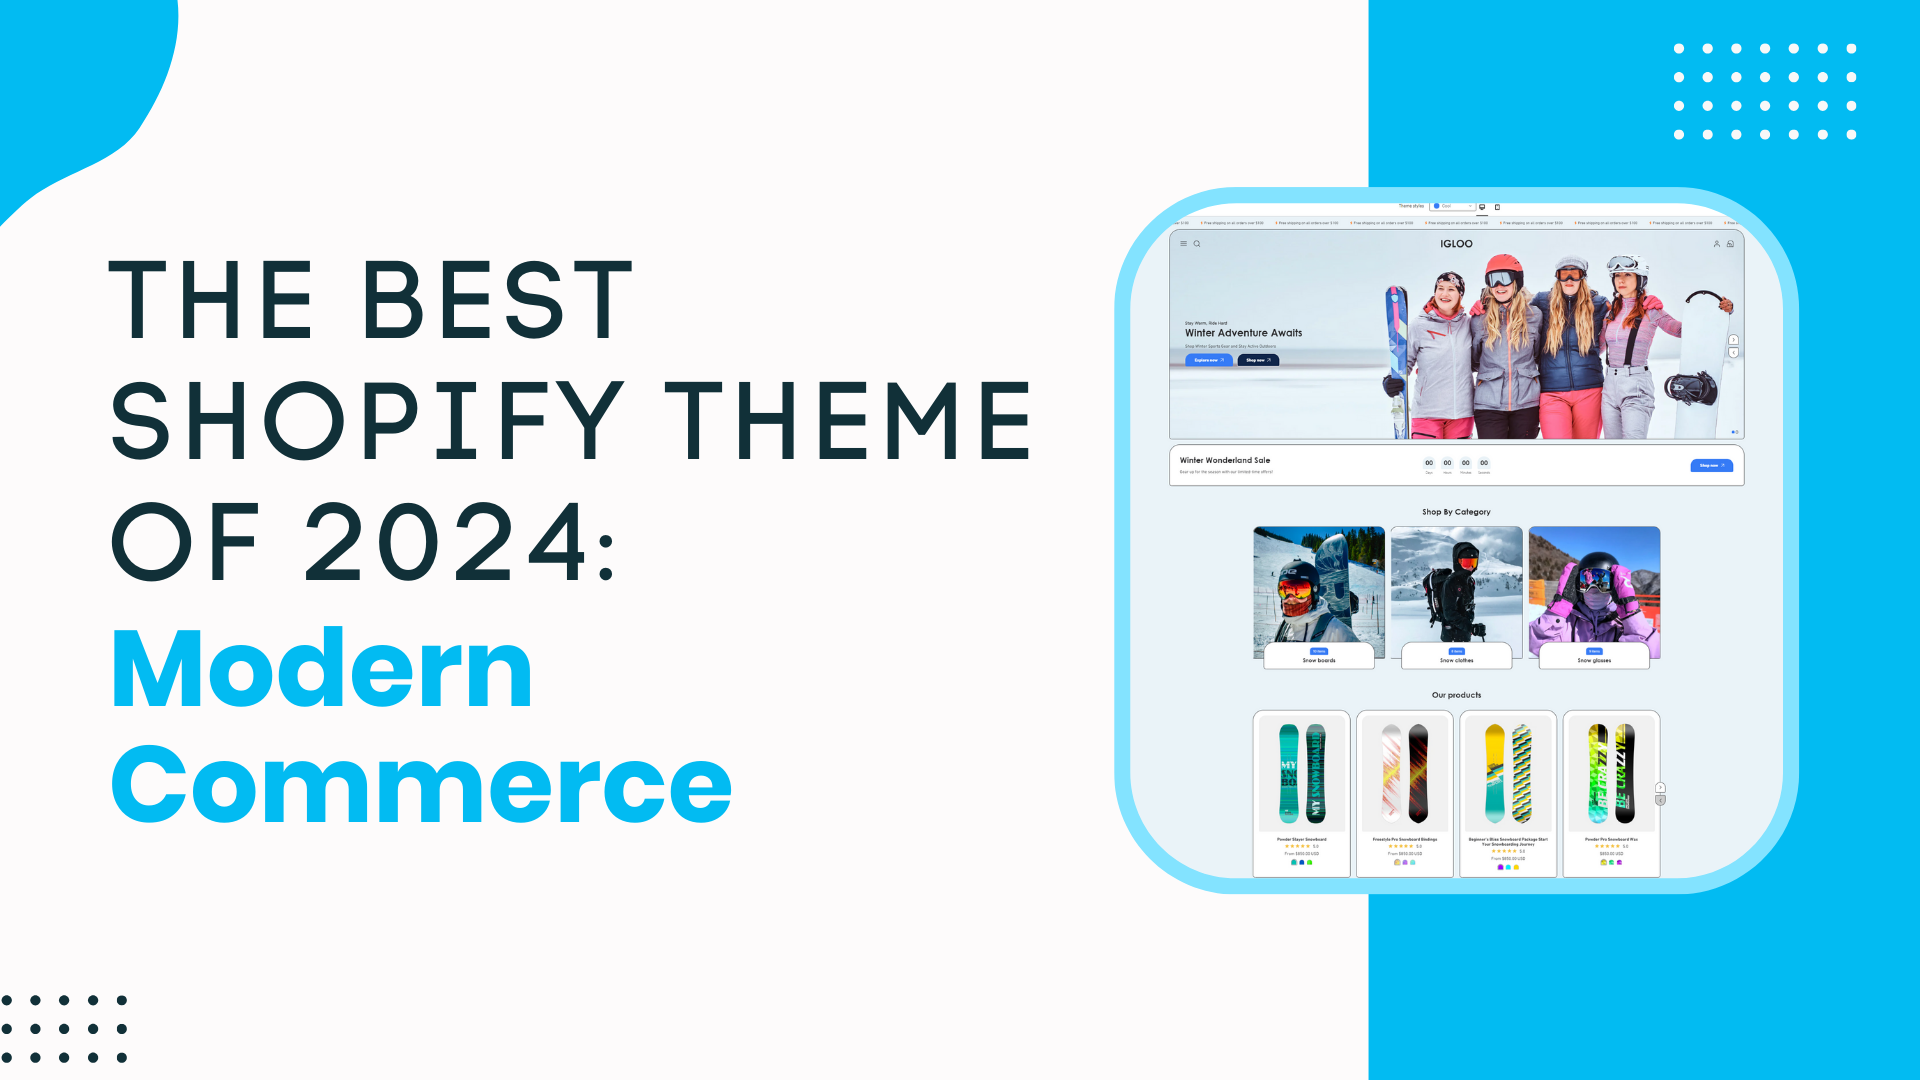 The Best Shopify Theme of 2024: Modern Commerce